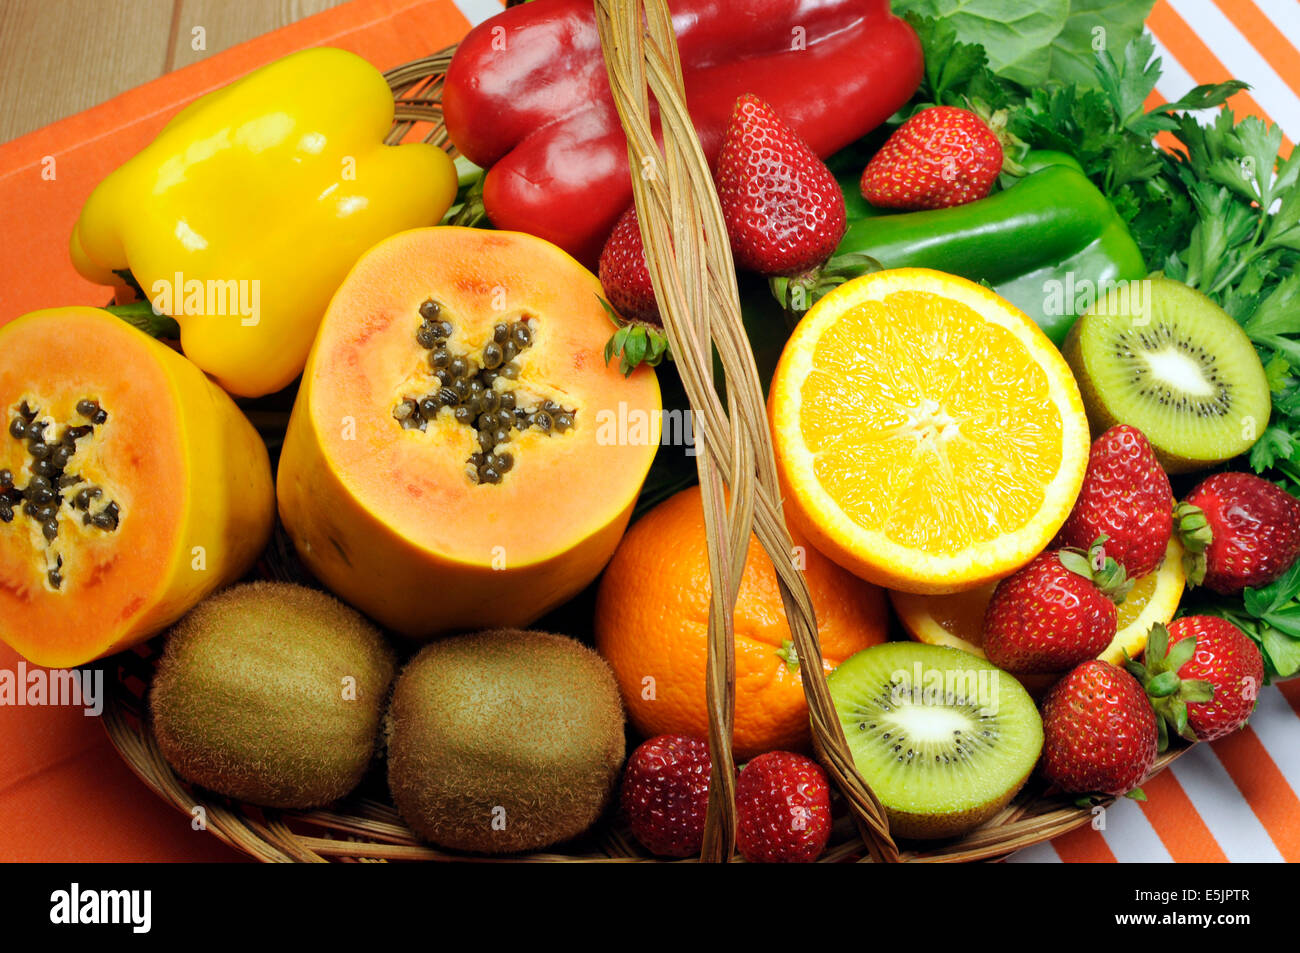 Healthy diet - sources of Vitamin C - oranges, strawberry, bell pepper capsicum, kiwi fruit, paw paw, spinach dark leafy greens Stock Photo